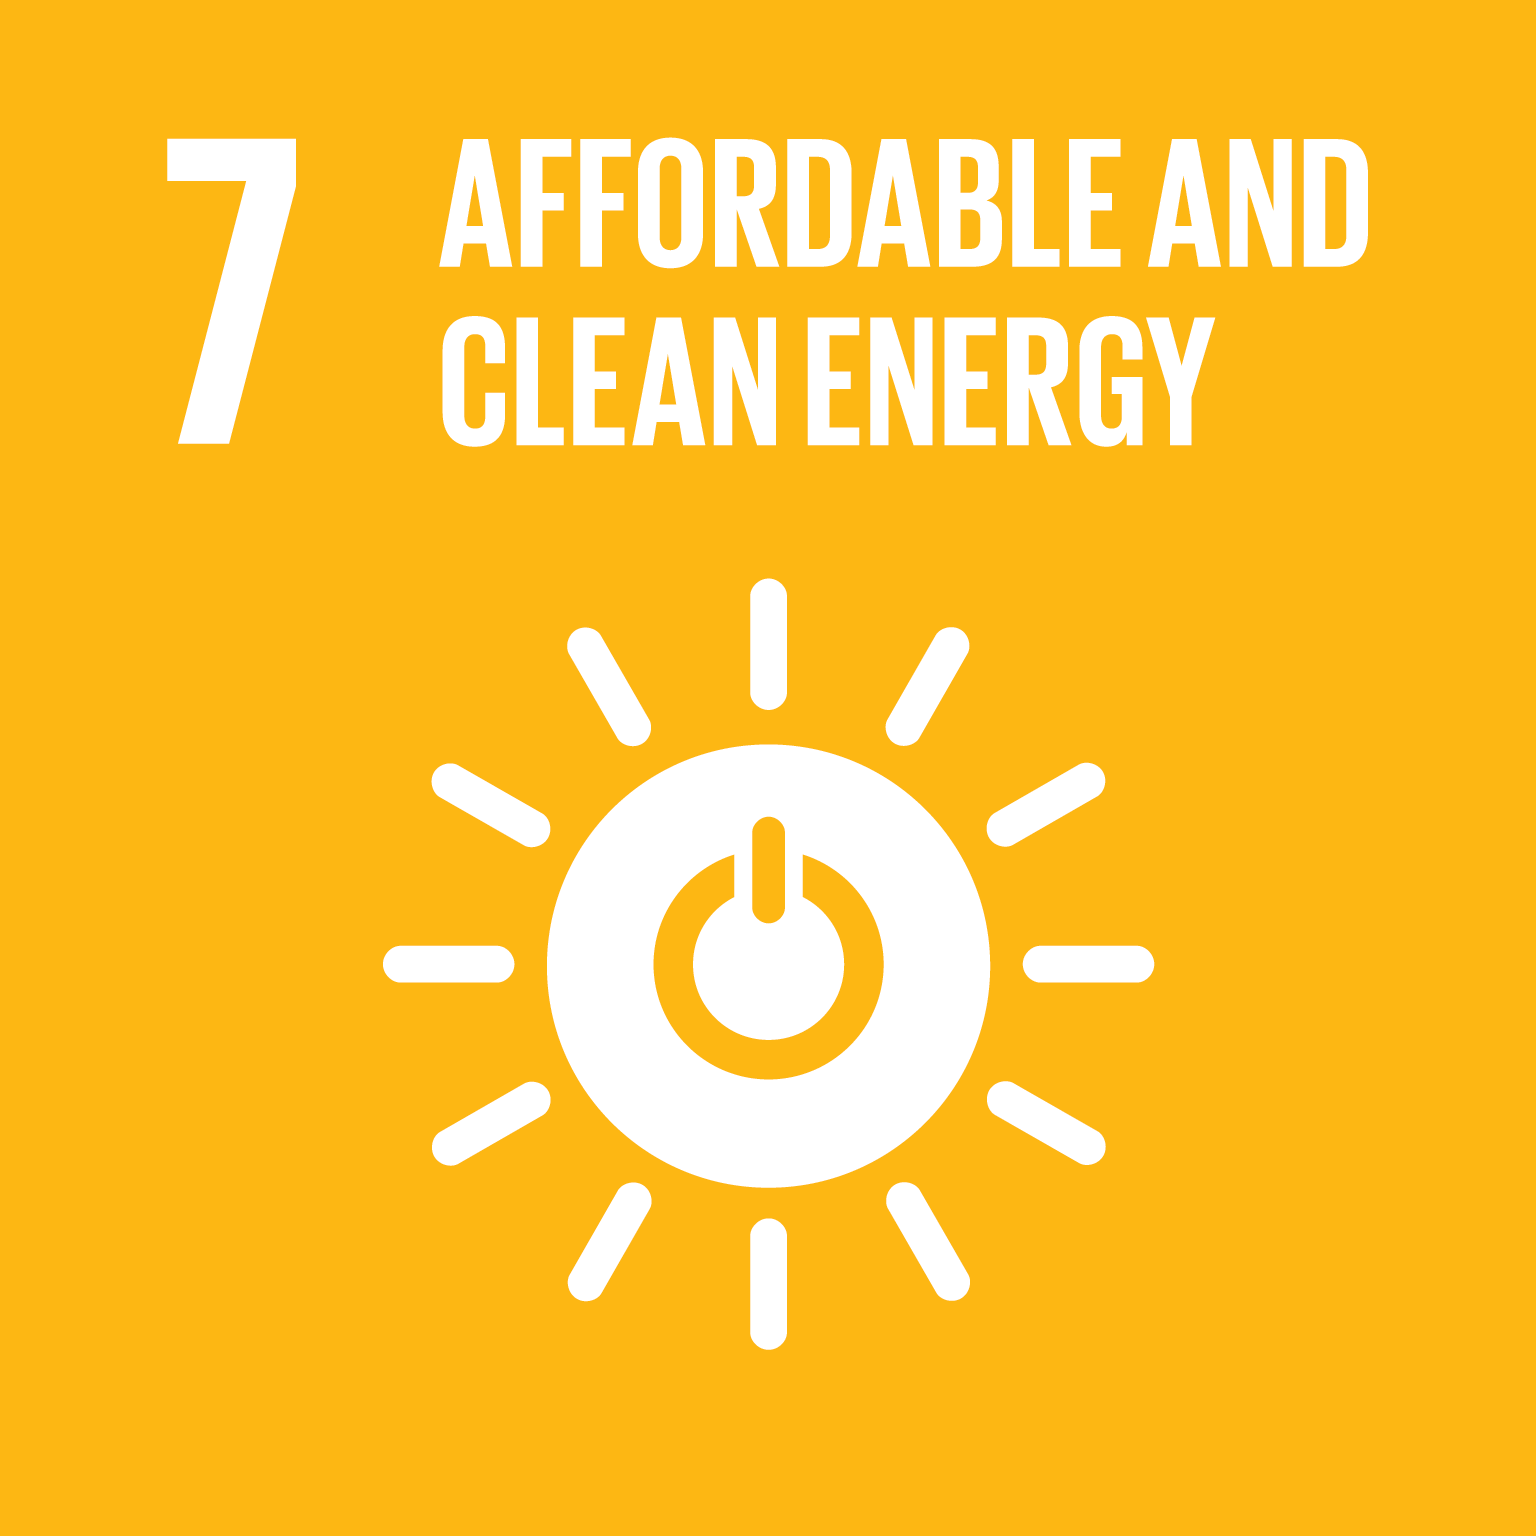 7: Affordable and clean energy